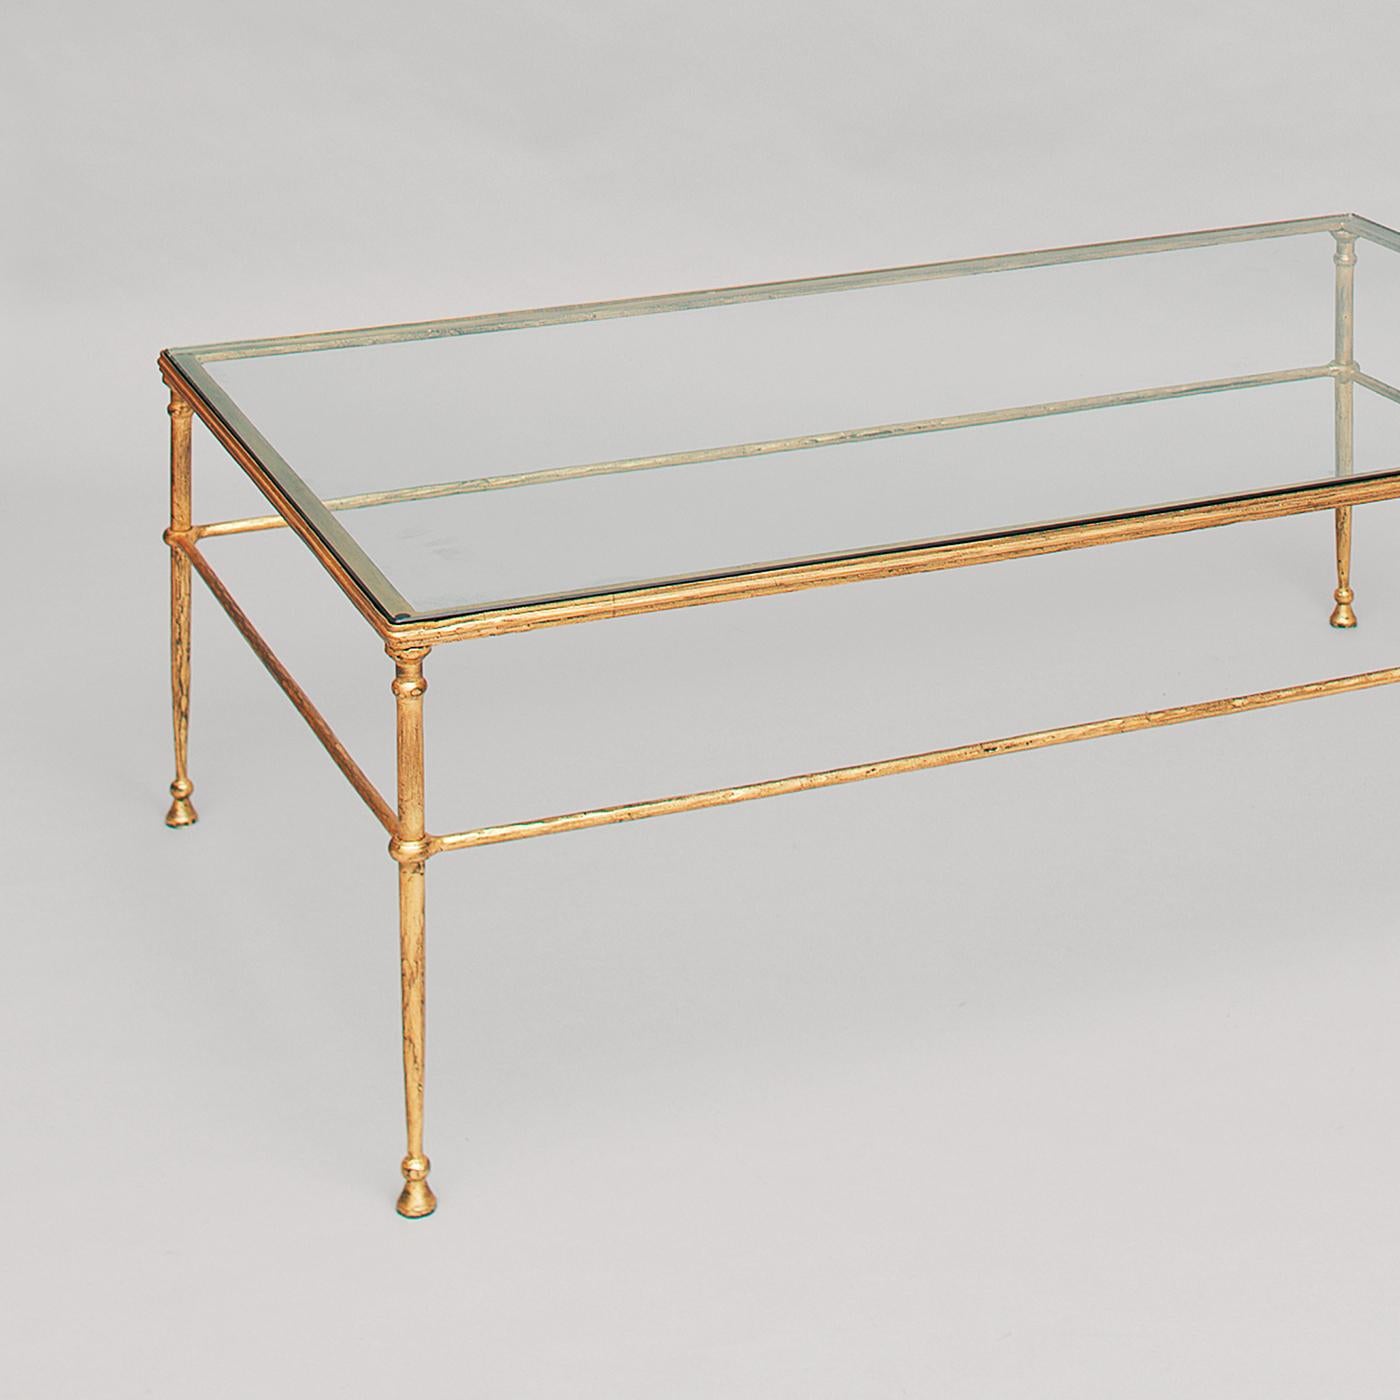 The sophisticated design of this tall coffee table evokes ancient Roman and Etruscan furniture, with their slender metal structures and harmonious proportions. The table's stainless steel elements create a net of delicate lines adorned with rings at